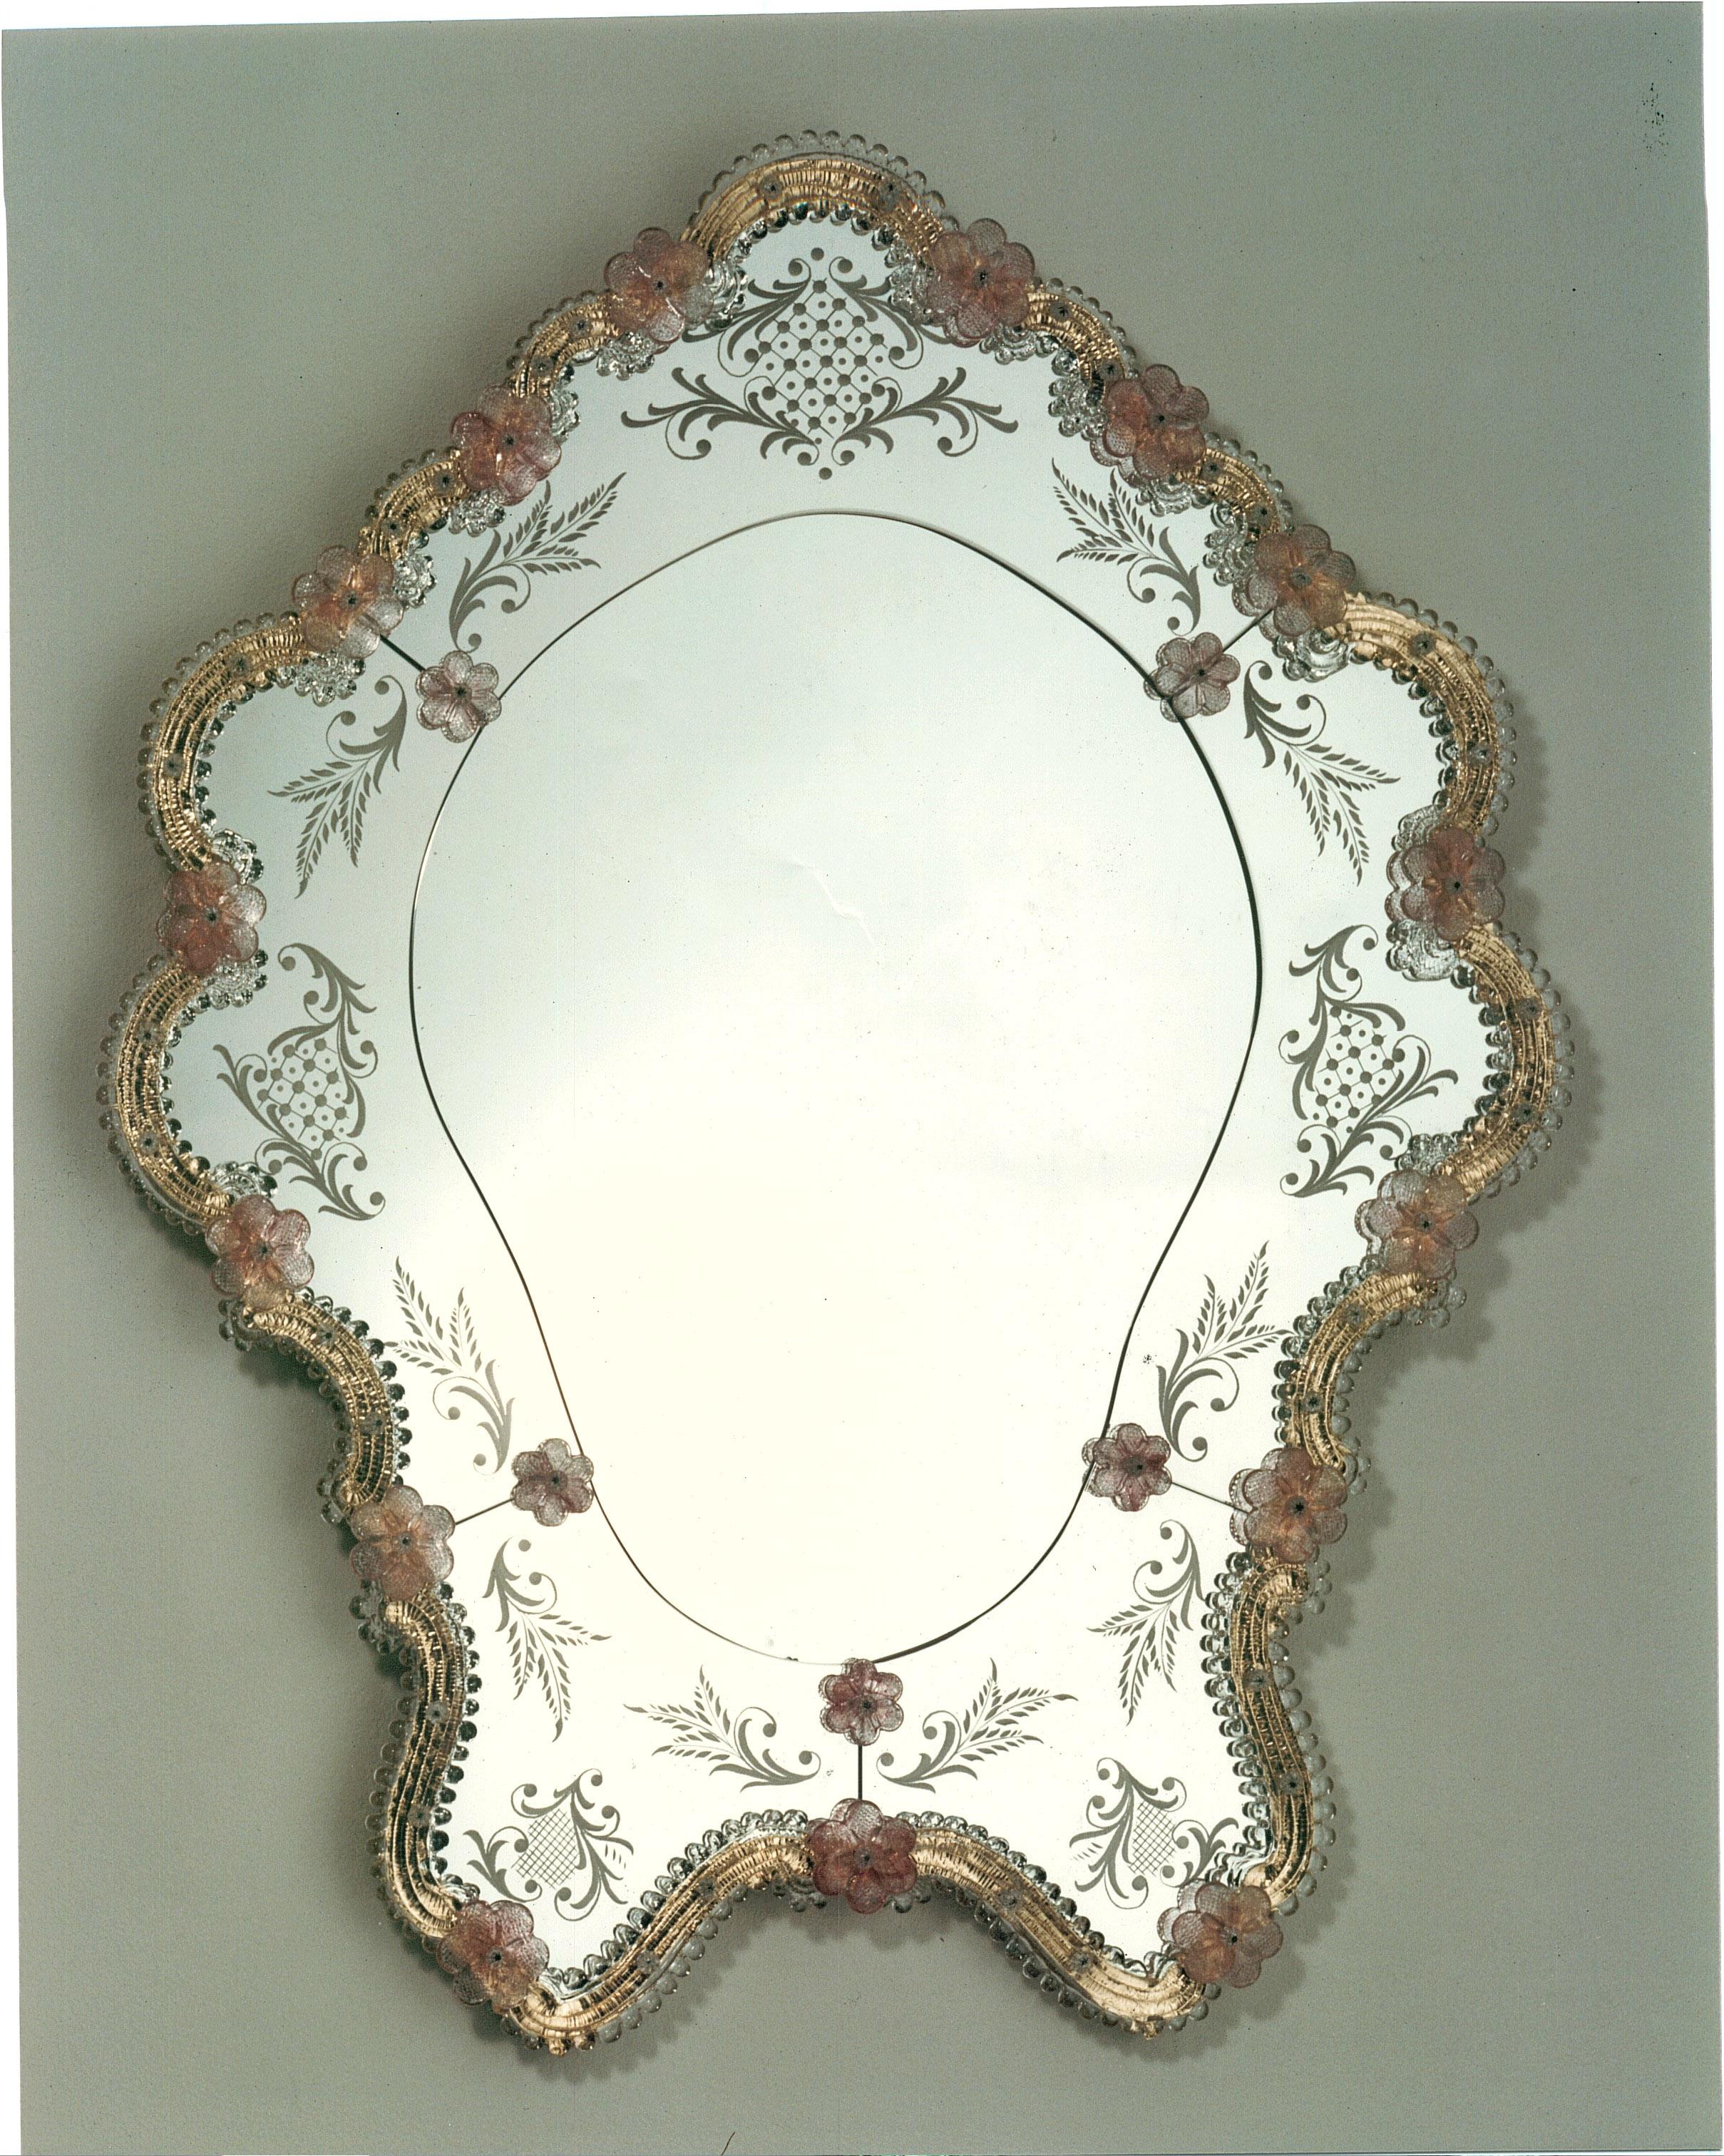 Murano glass mirror in Venetian style, mirror made from a design by Fratelli Tosi, entirely handmade according to the techniques of our ancestors. Mirror composed of a crystal and ruby frame in Murano glass and decorated with Murano glass curls, all